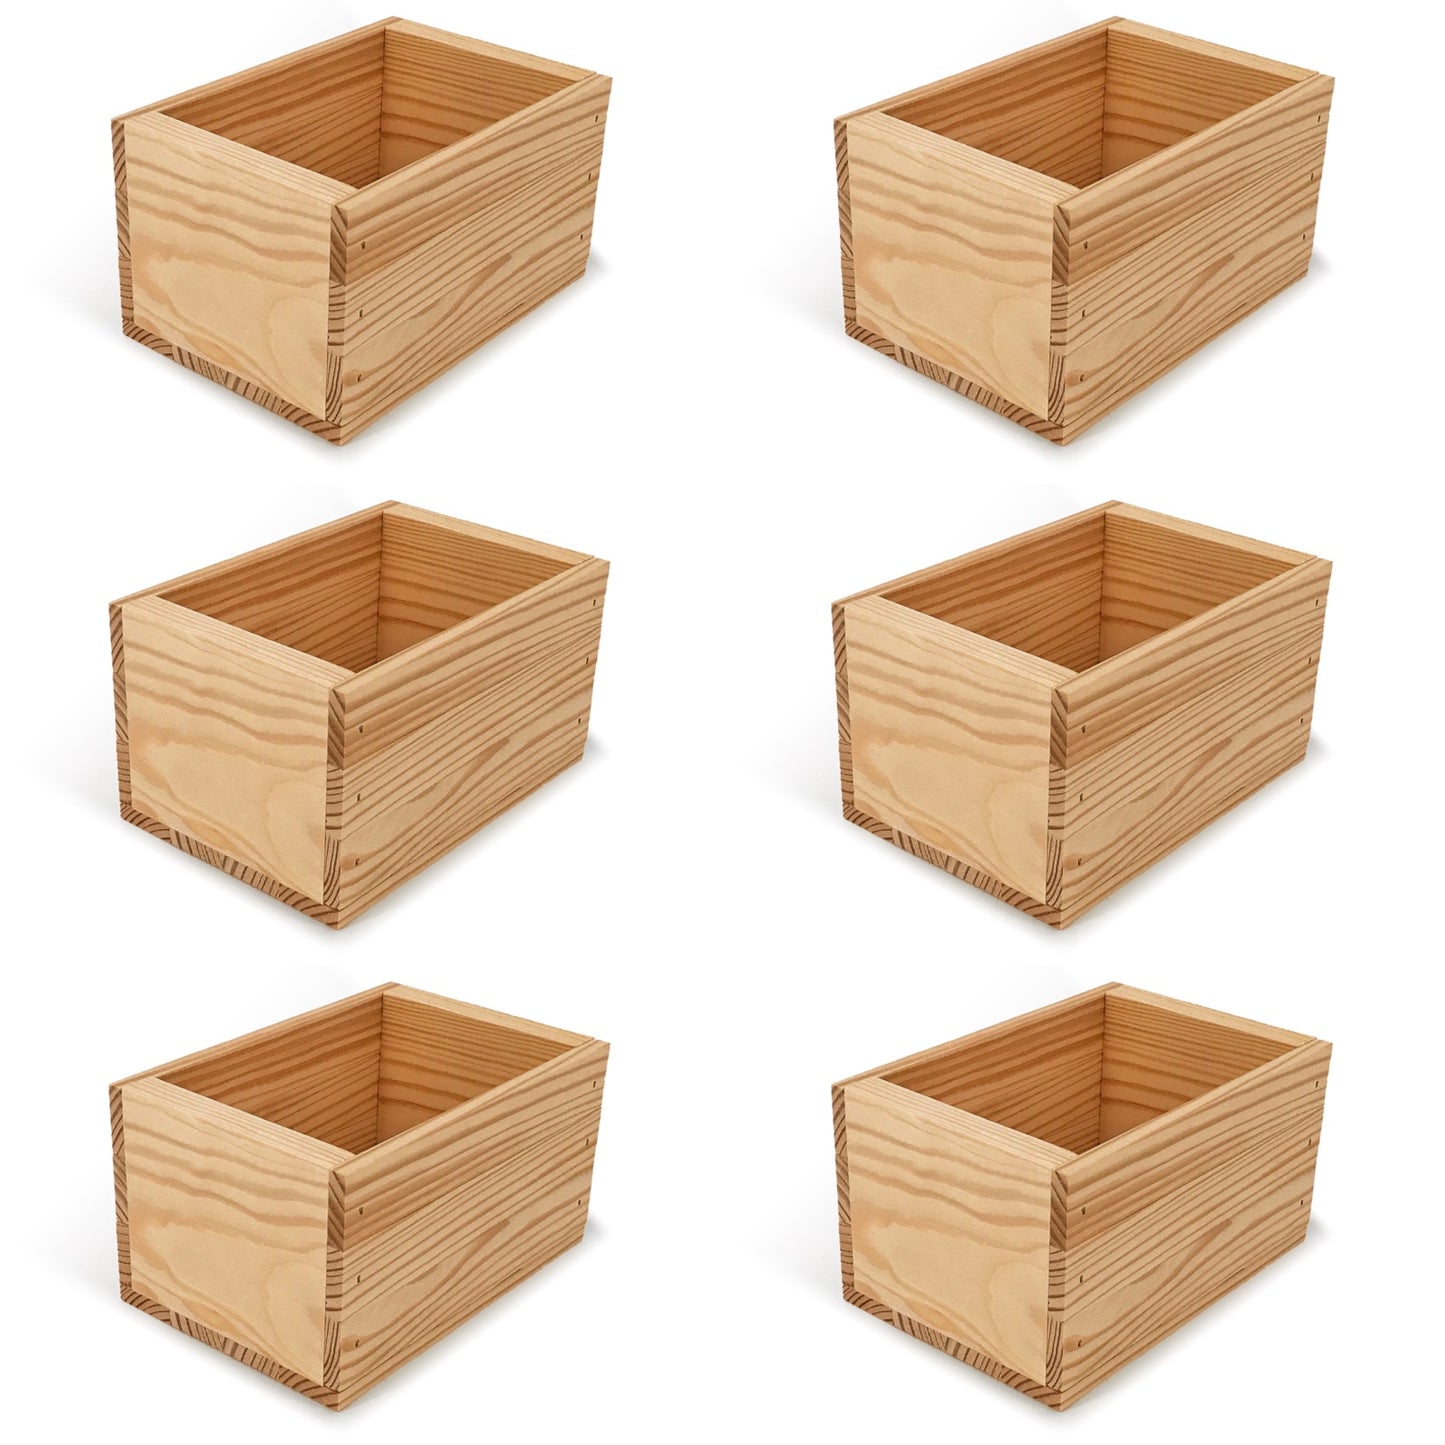 6 Small wooden crates 7x5x4.25